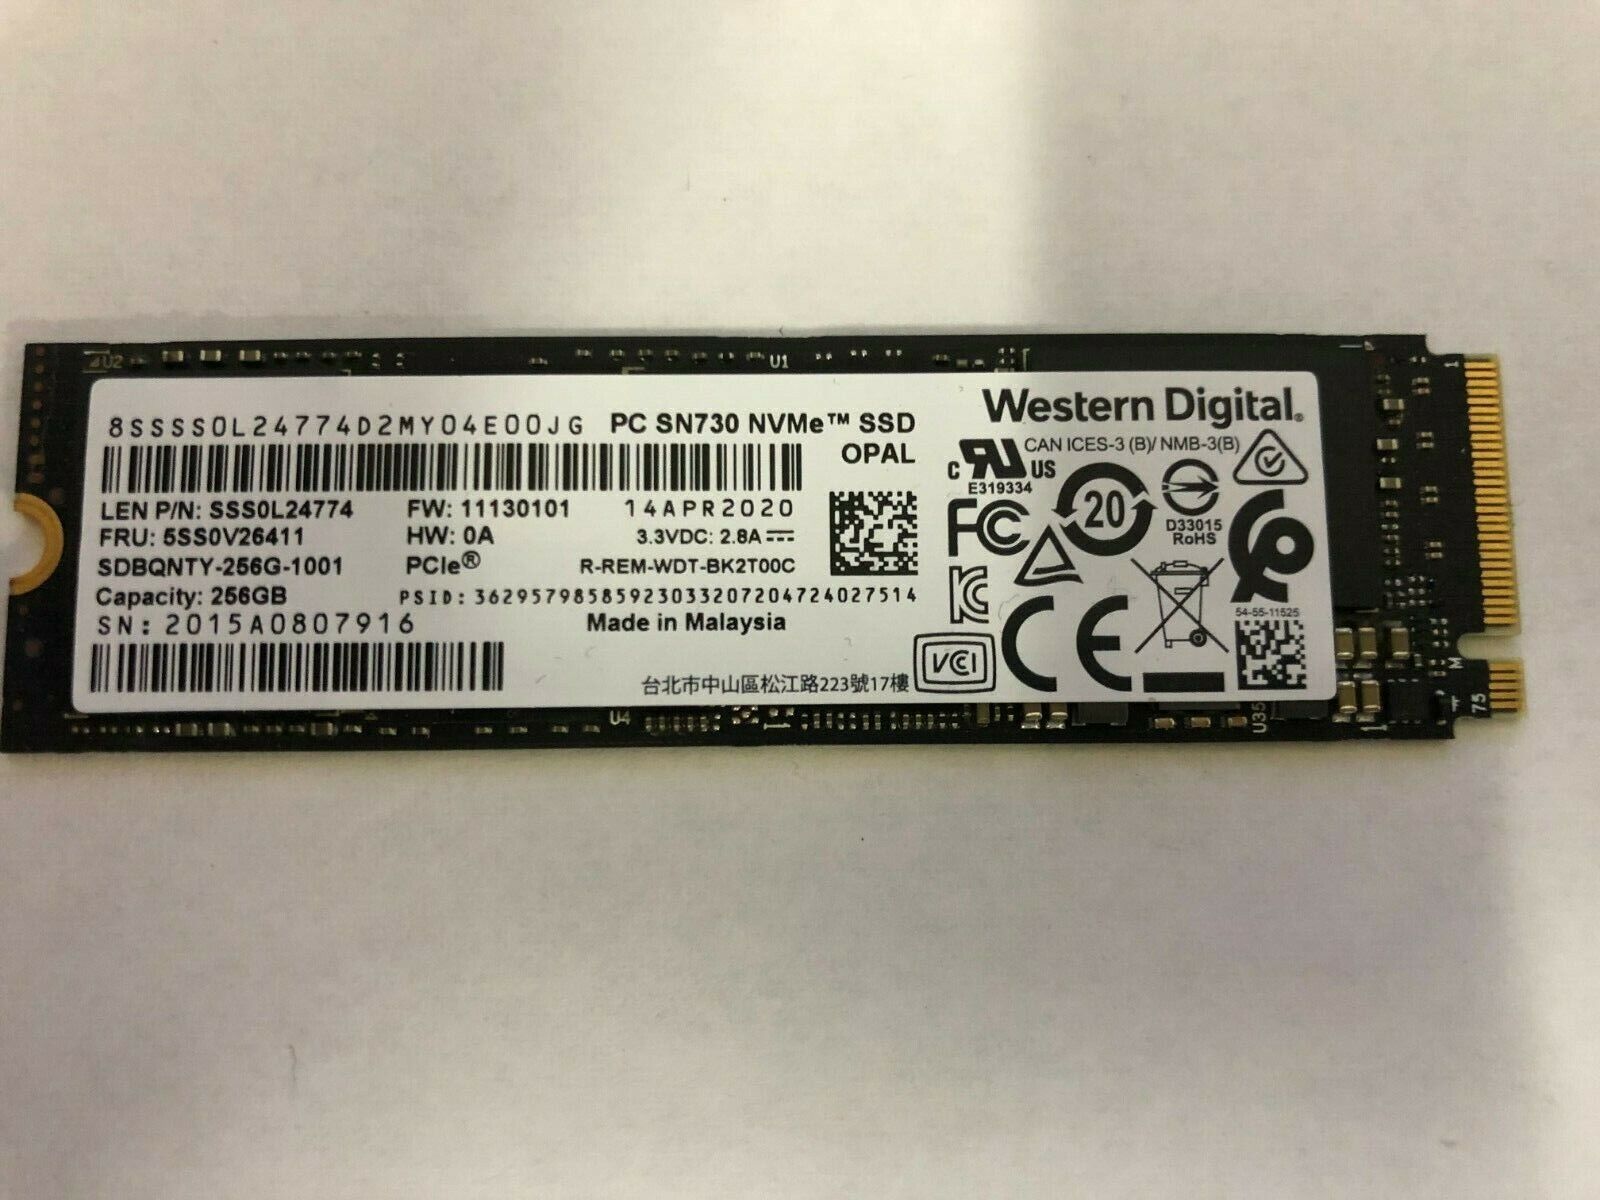 256GB WD SN730 NVMe PCIe M.2 SSD Solid State Drive SDBQNTY-256G-1001